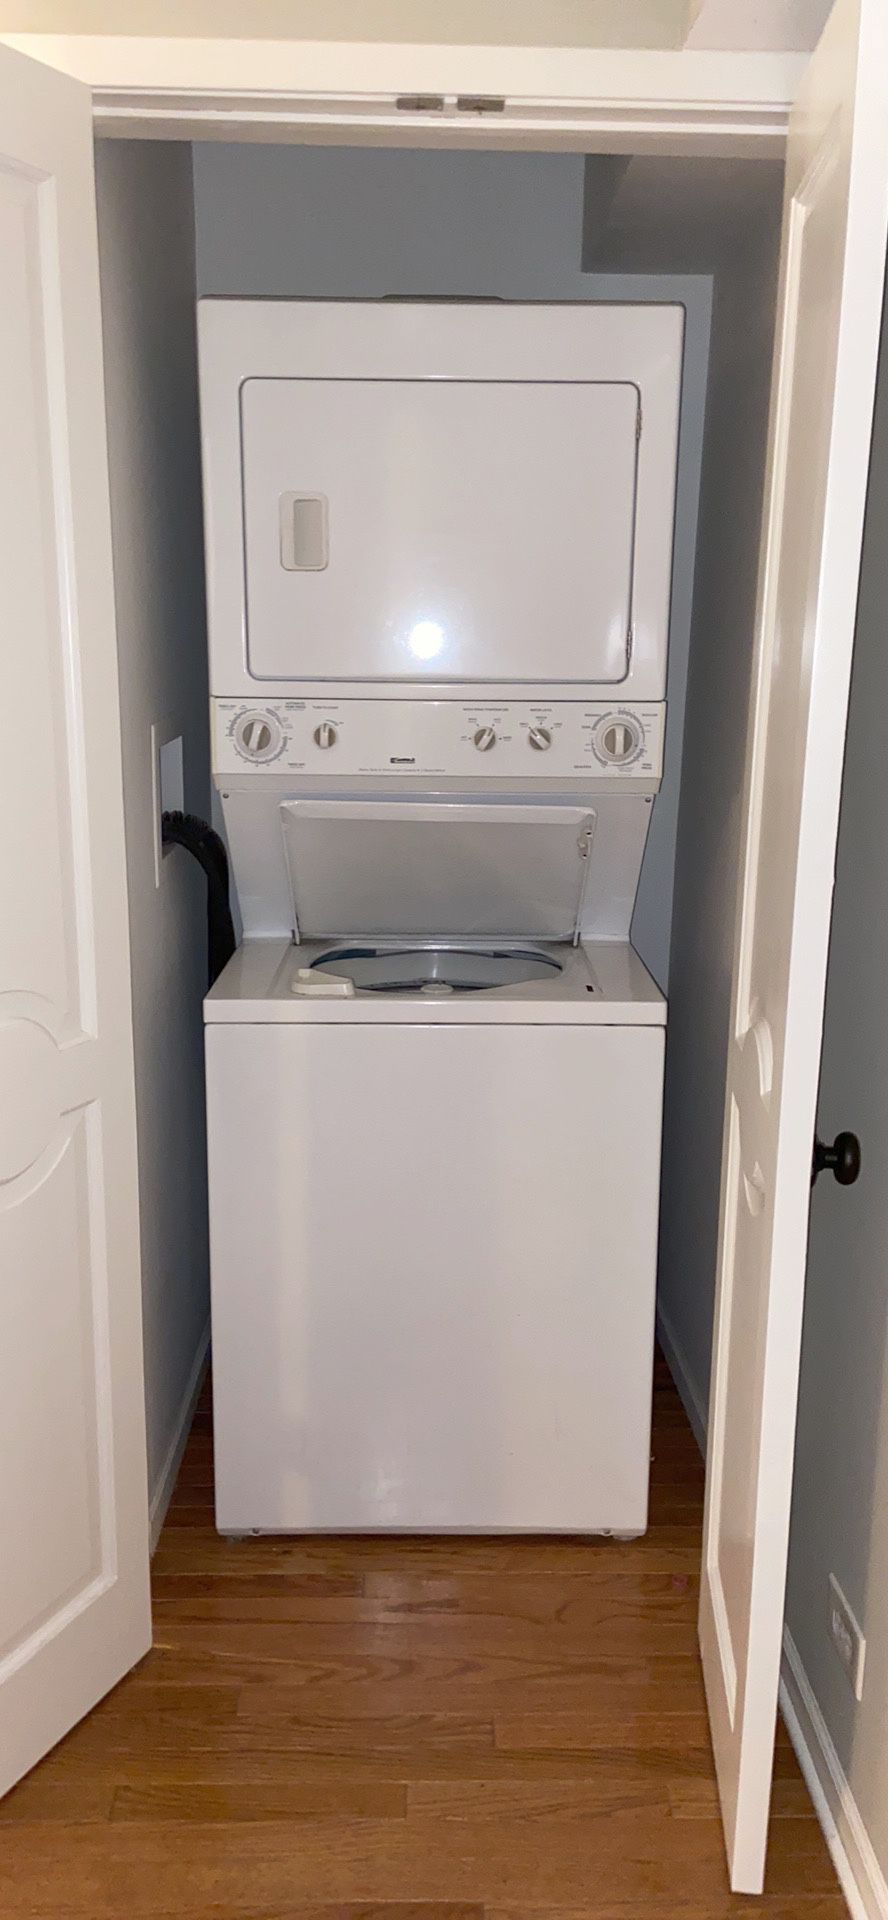 Top Bottom Electric Washer Dryer